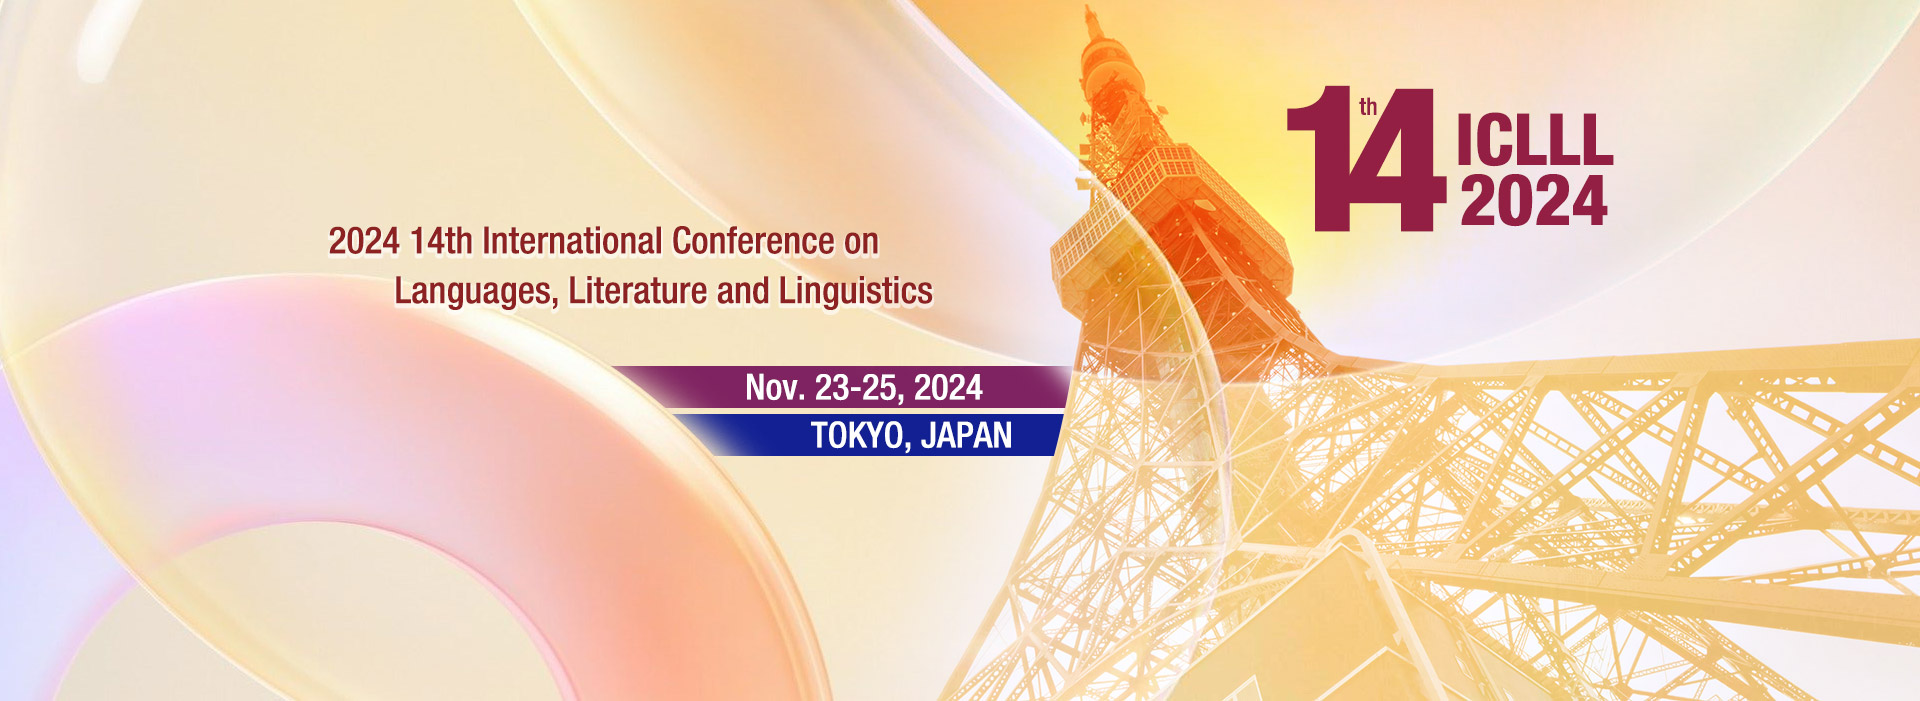 13th ICLLL 2023International Conference on Languages, Literature and